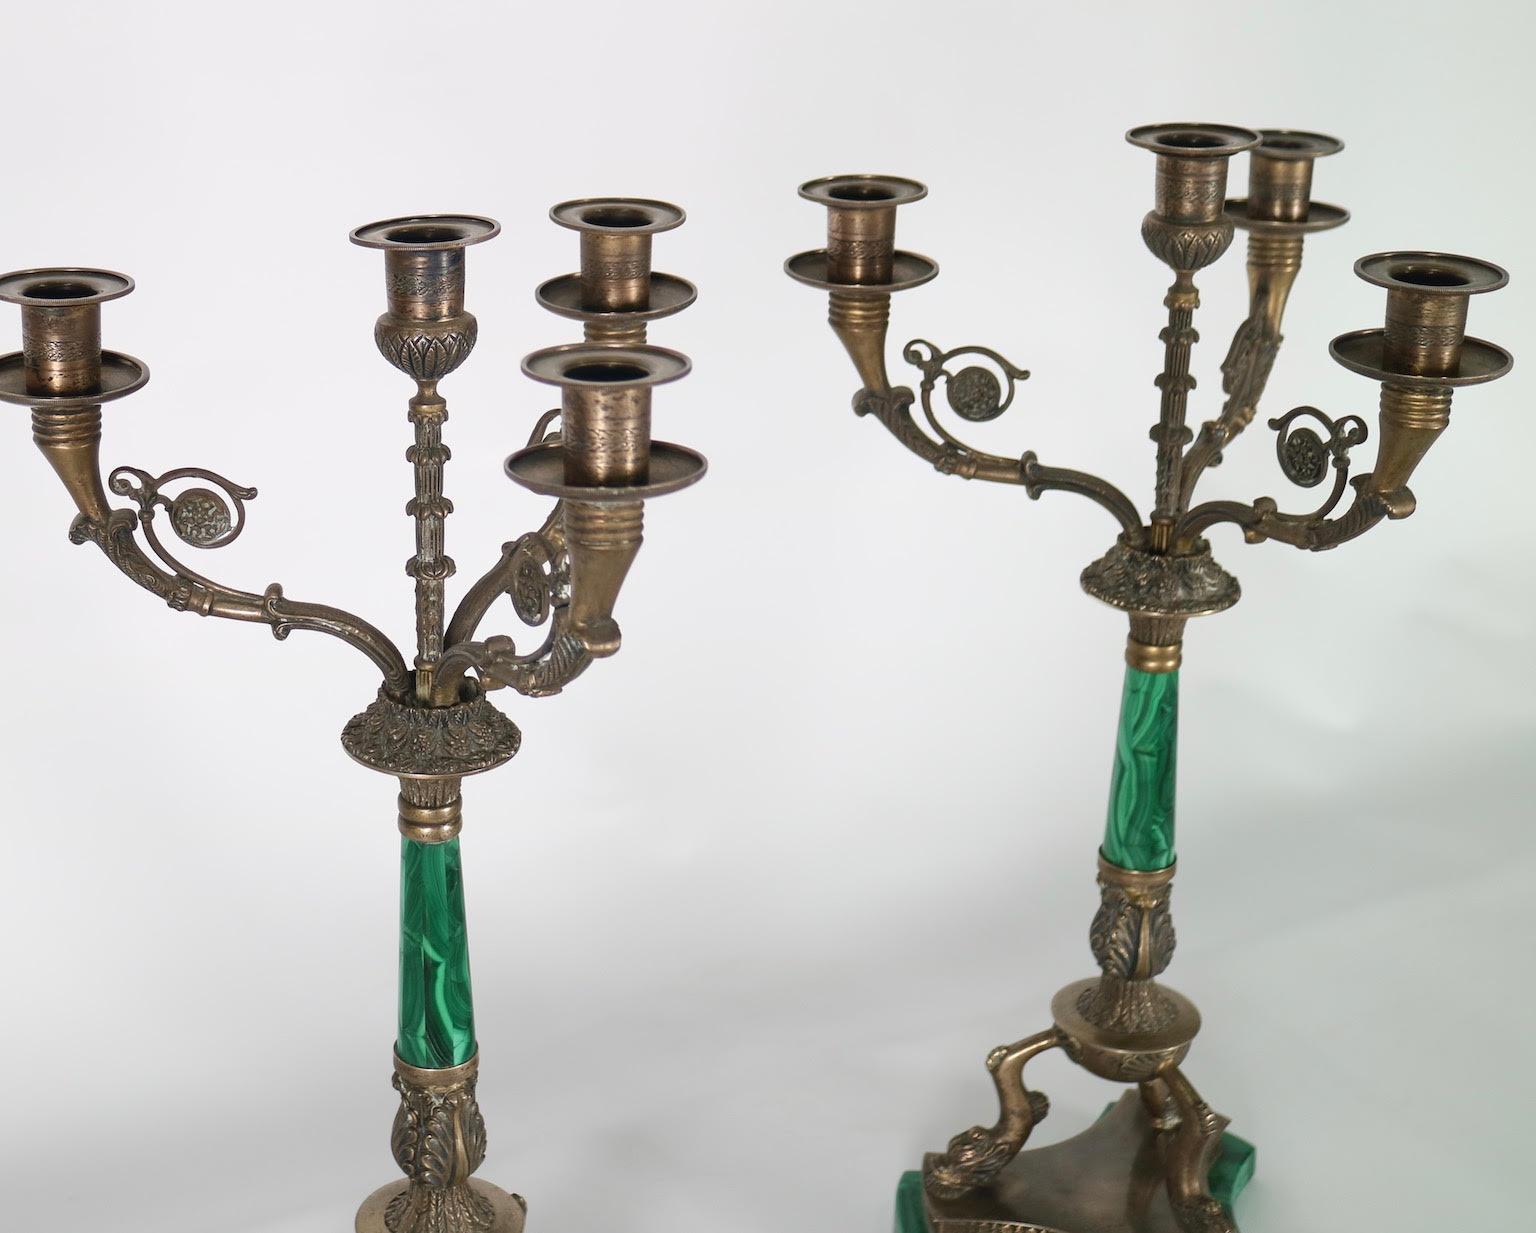 Pair of Italian Hollywood Regency candelabras in silver plated metal with malachite stem and base. Each candelabra has three arms surrounding a central arm. The pair was made in Italy during the 1950s and is in excellent vintage condition with